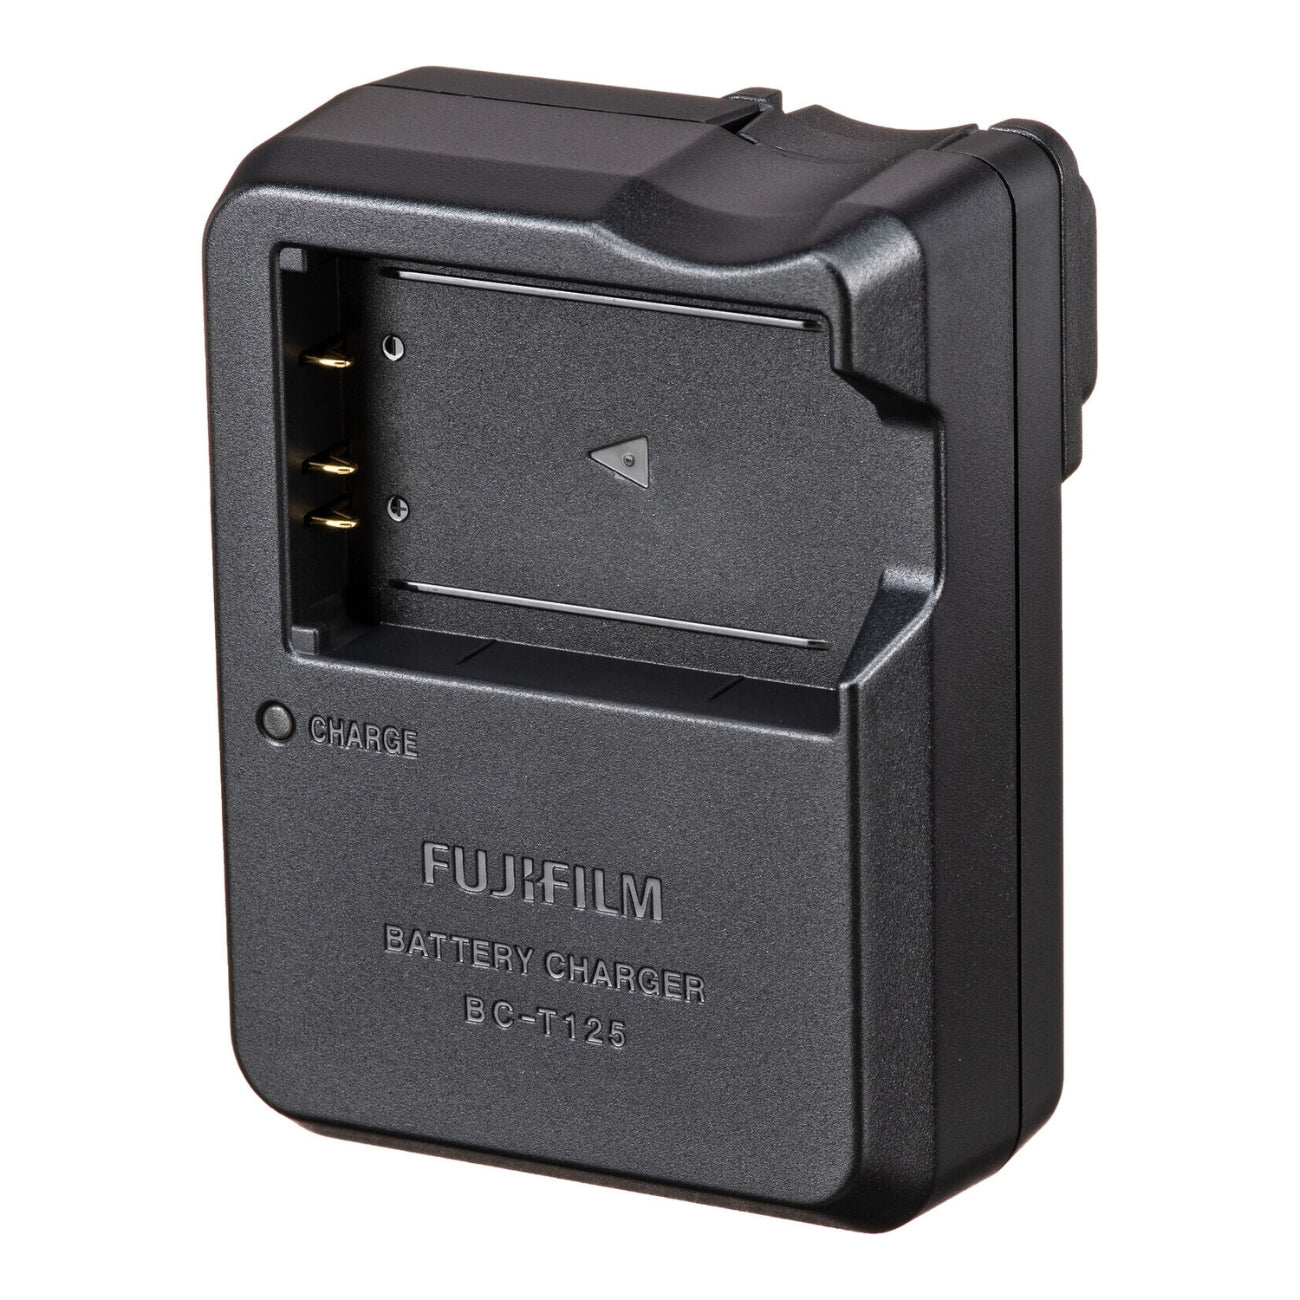 Fujifilm BC-T125 Battery Charger - Side View